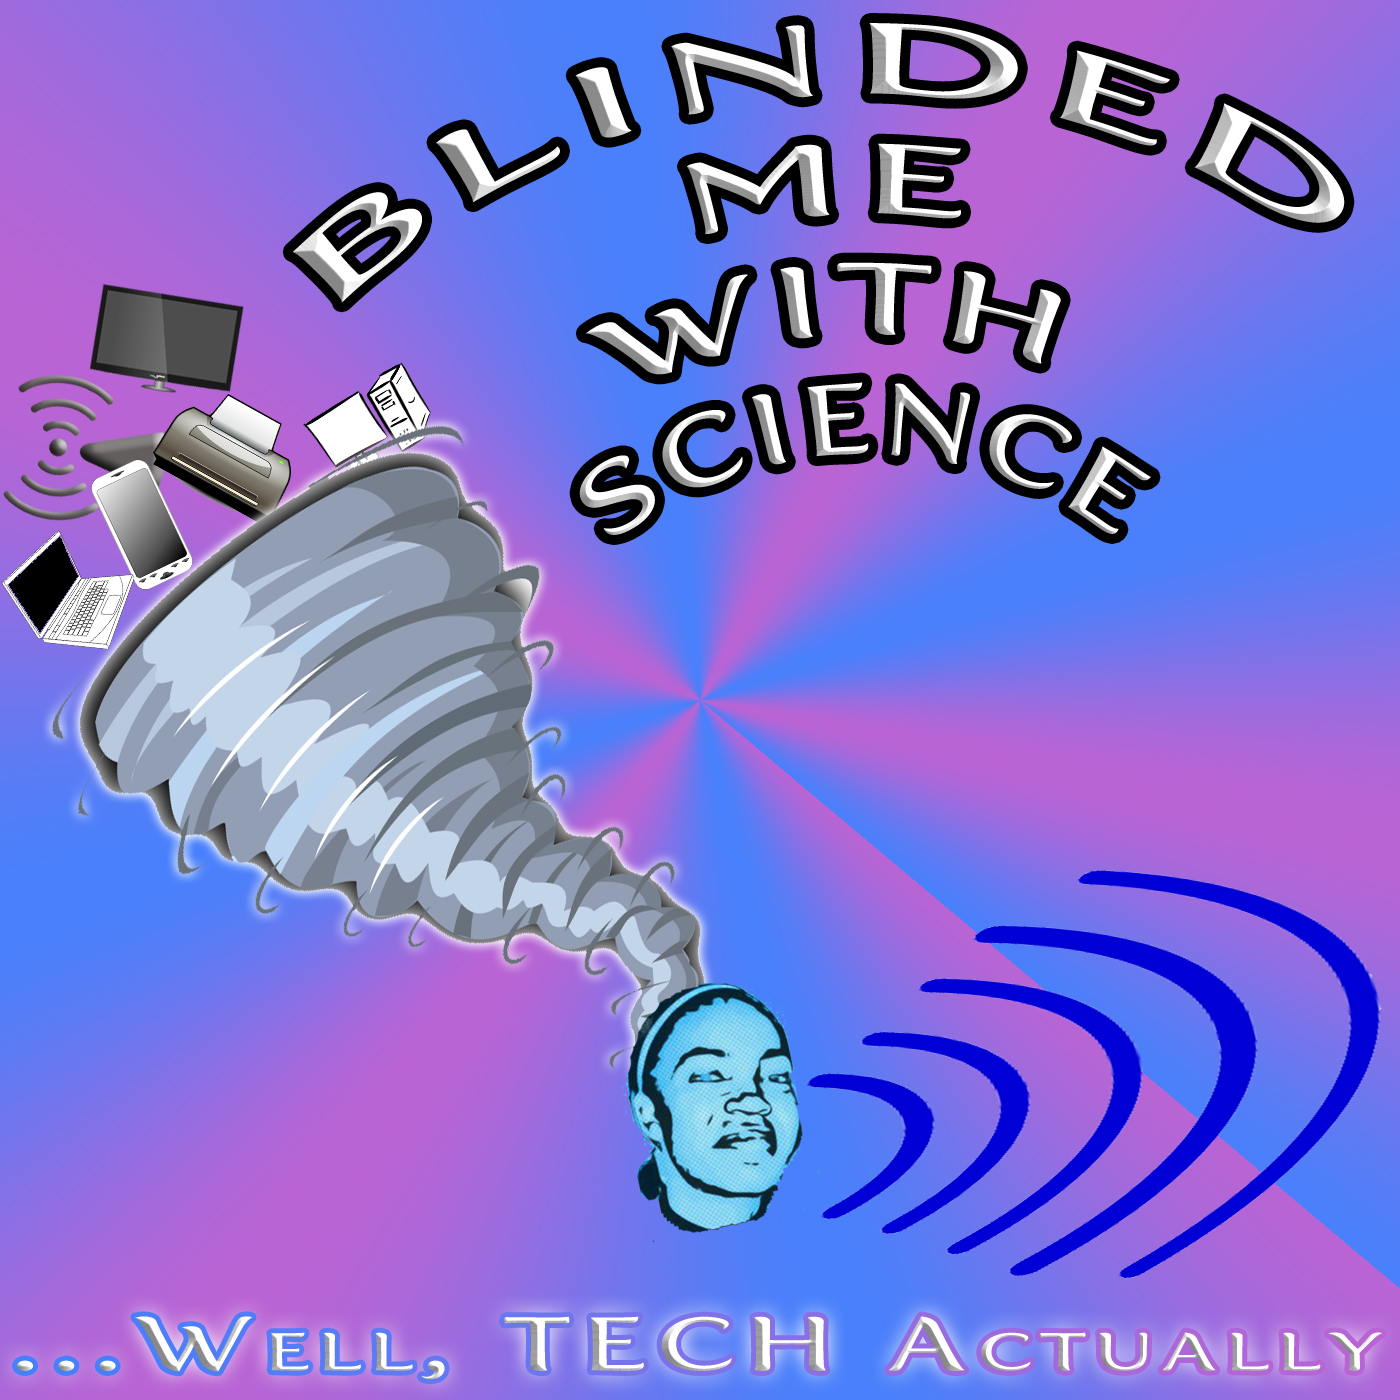 Blinded Me With Science - NTR Associates